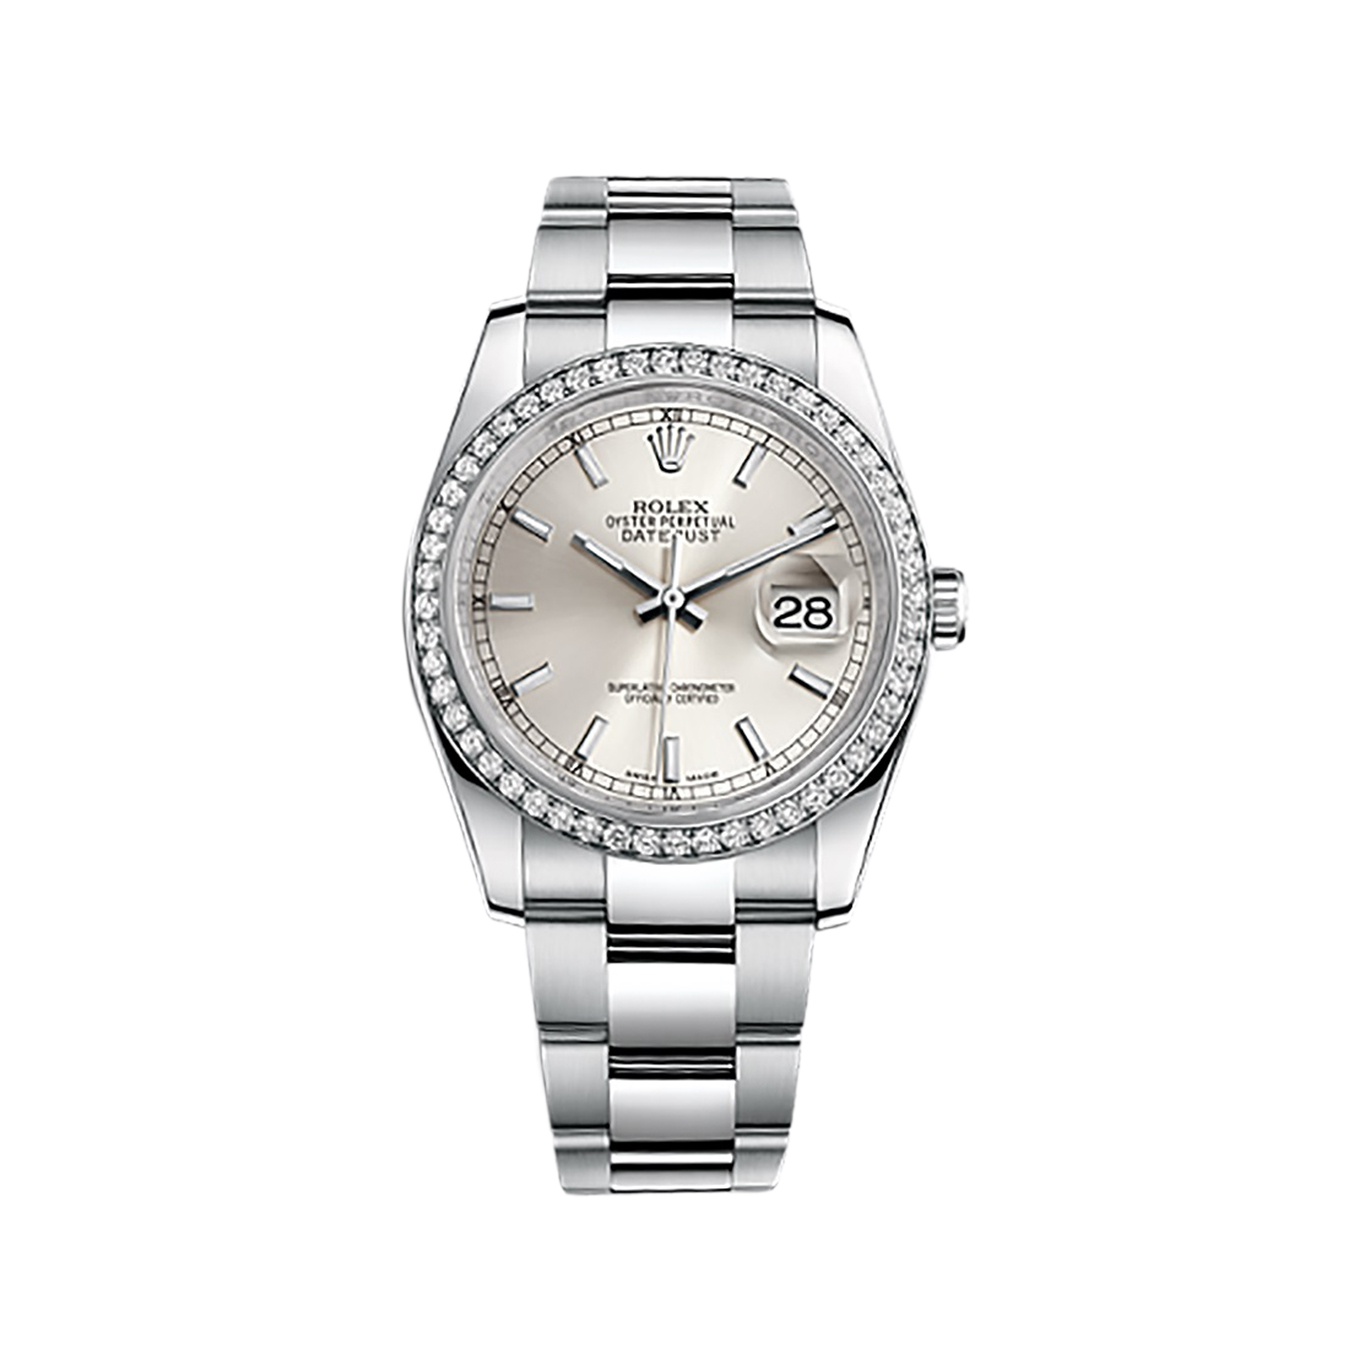 Datejust 36 116244 White Gold & Stainless Steel Watch (Silver)